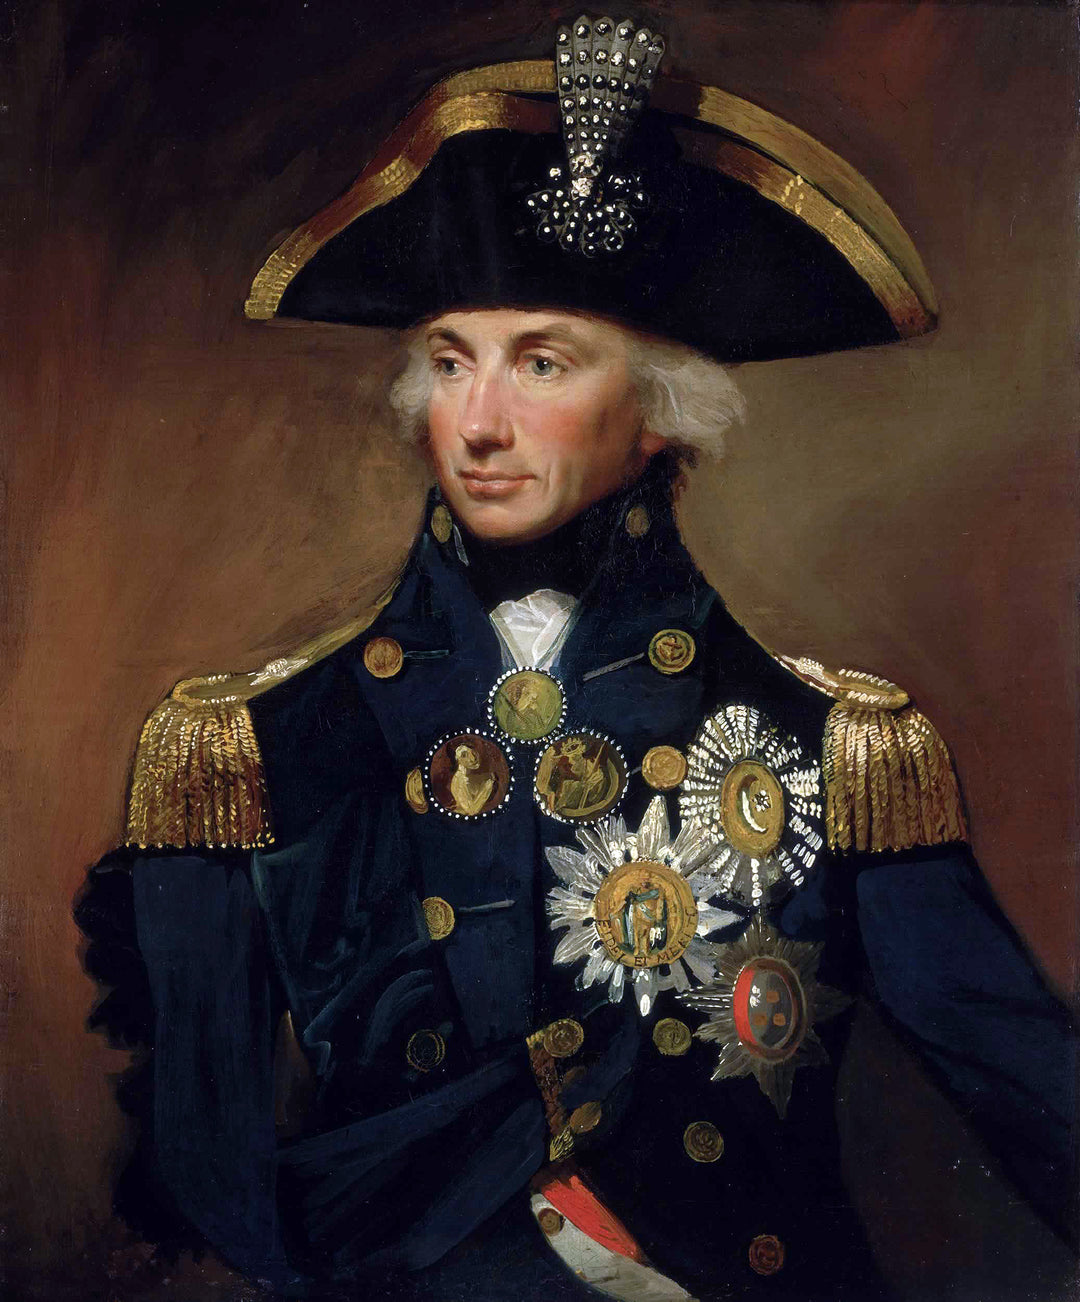 Admiral Lord Nelson: A Life of Heroism and Naval Mastery